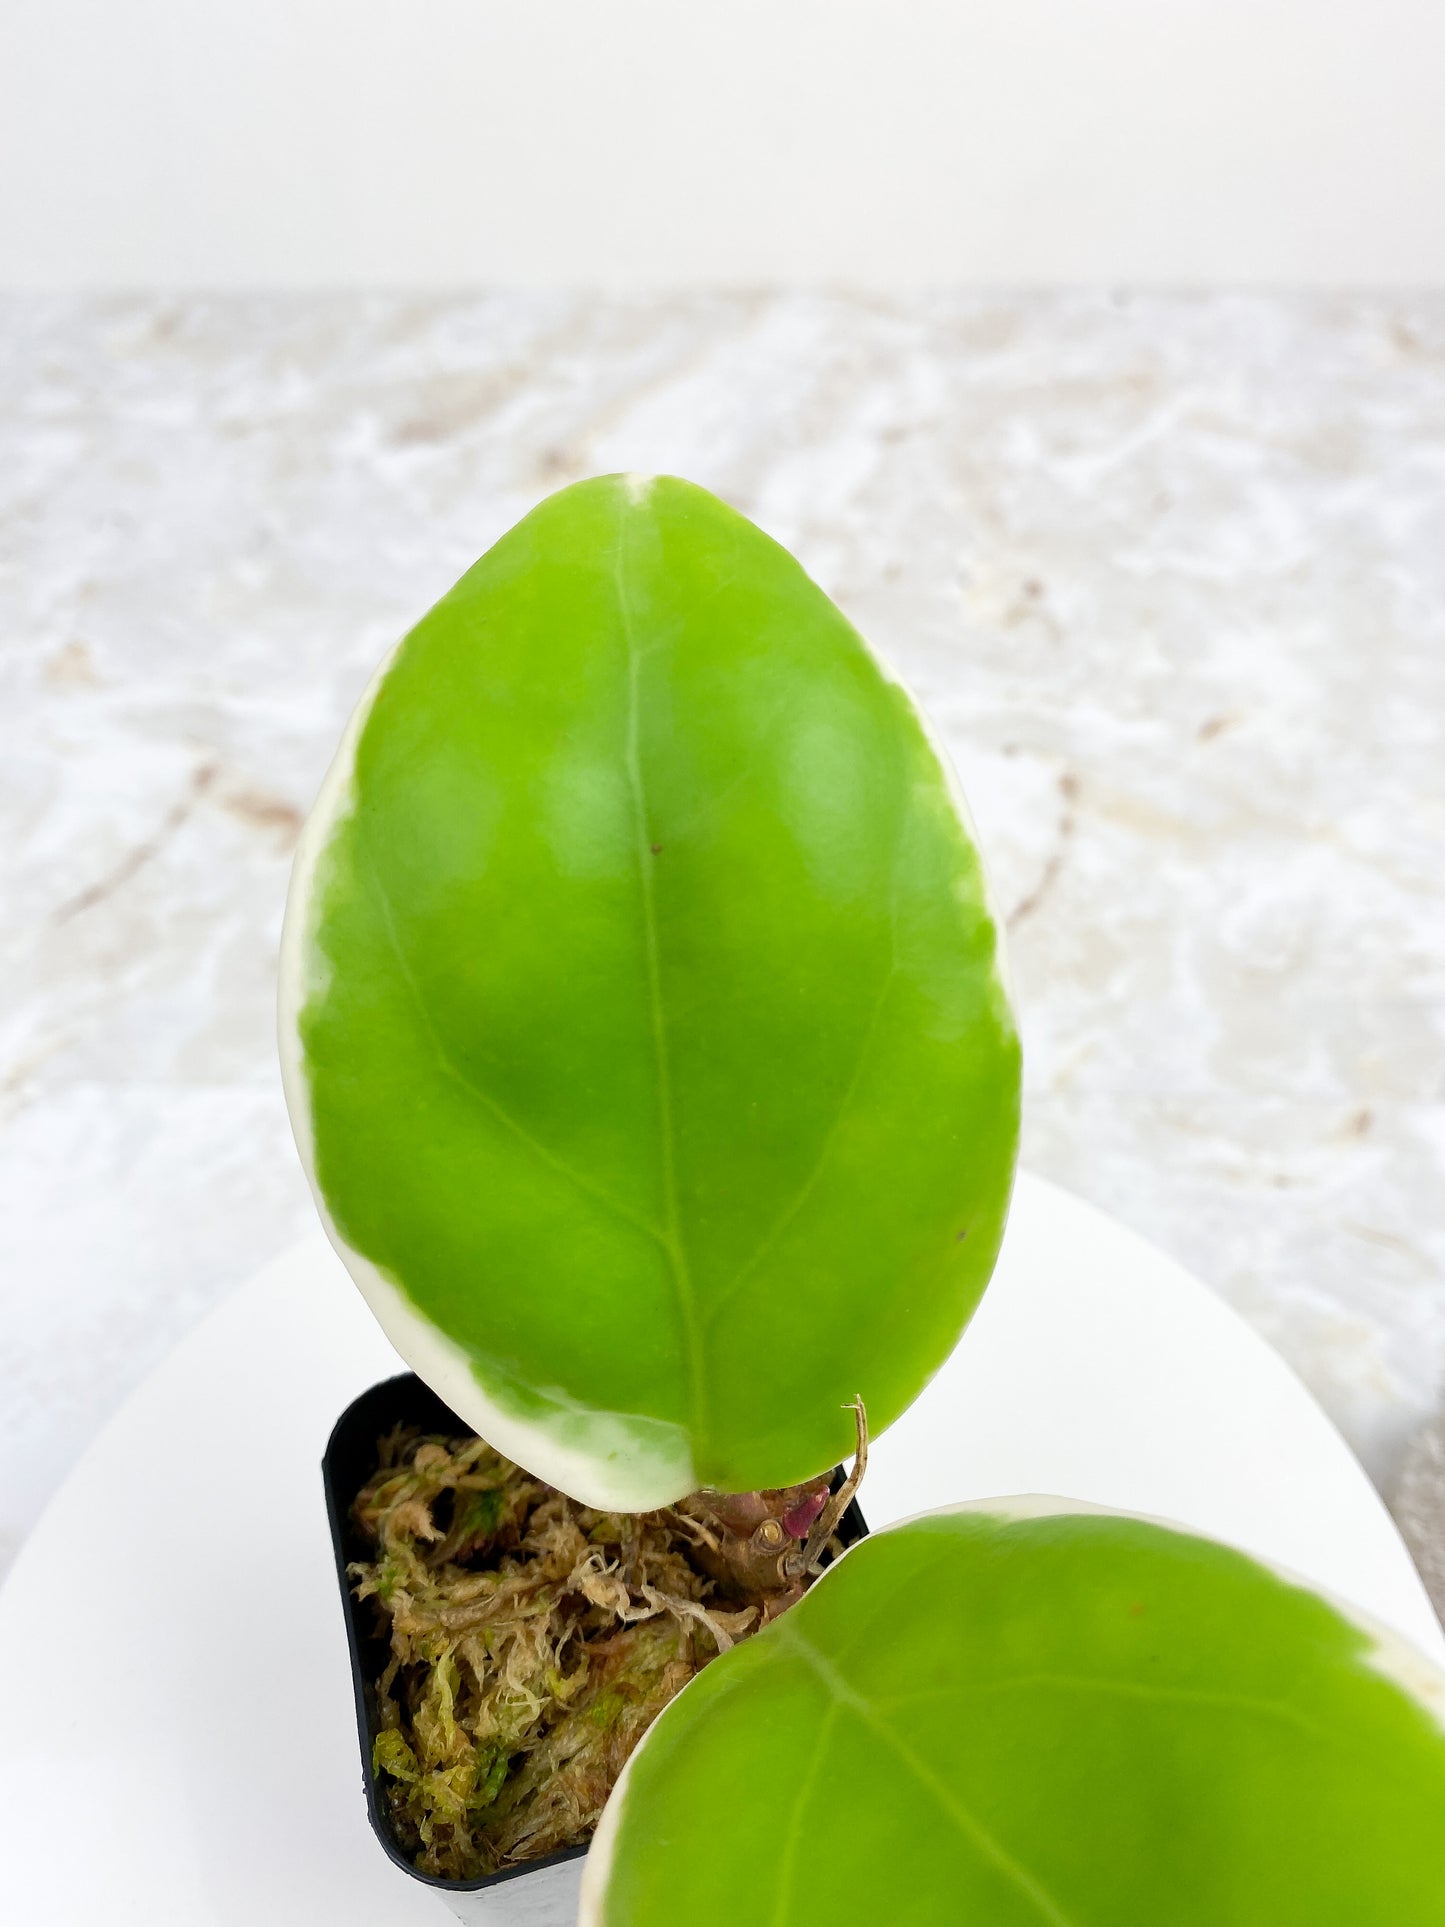 Private sale: Hoya pachyclada variegated 2 leaves and 2 baby leaves FREE 1 Global green and 1 silver lady